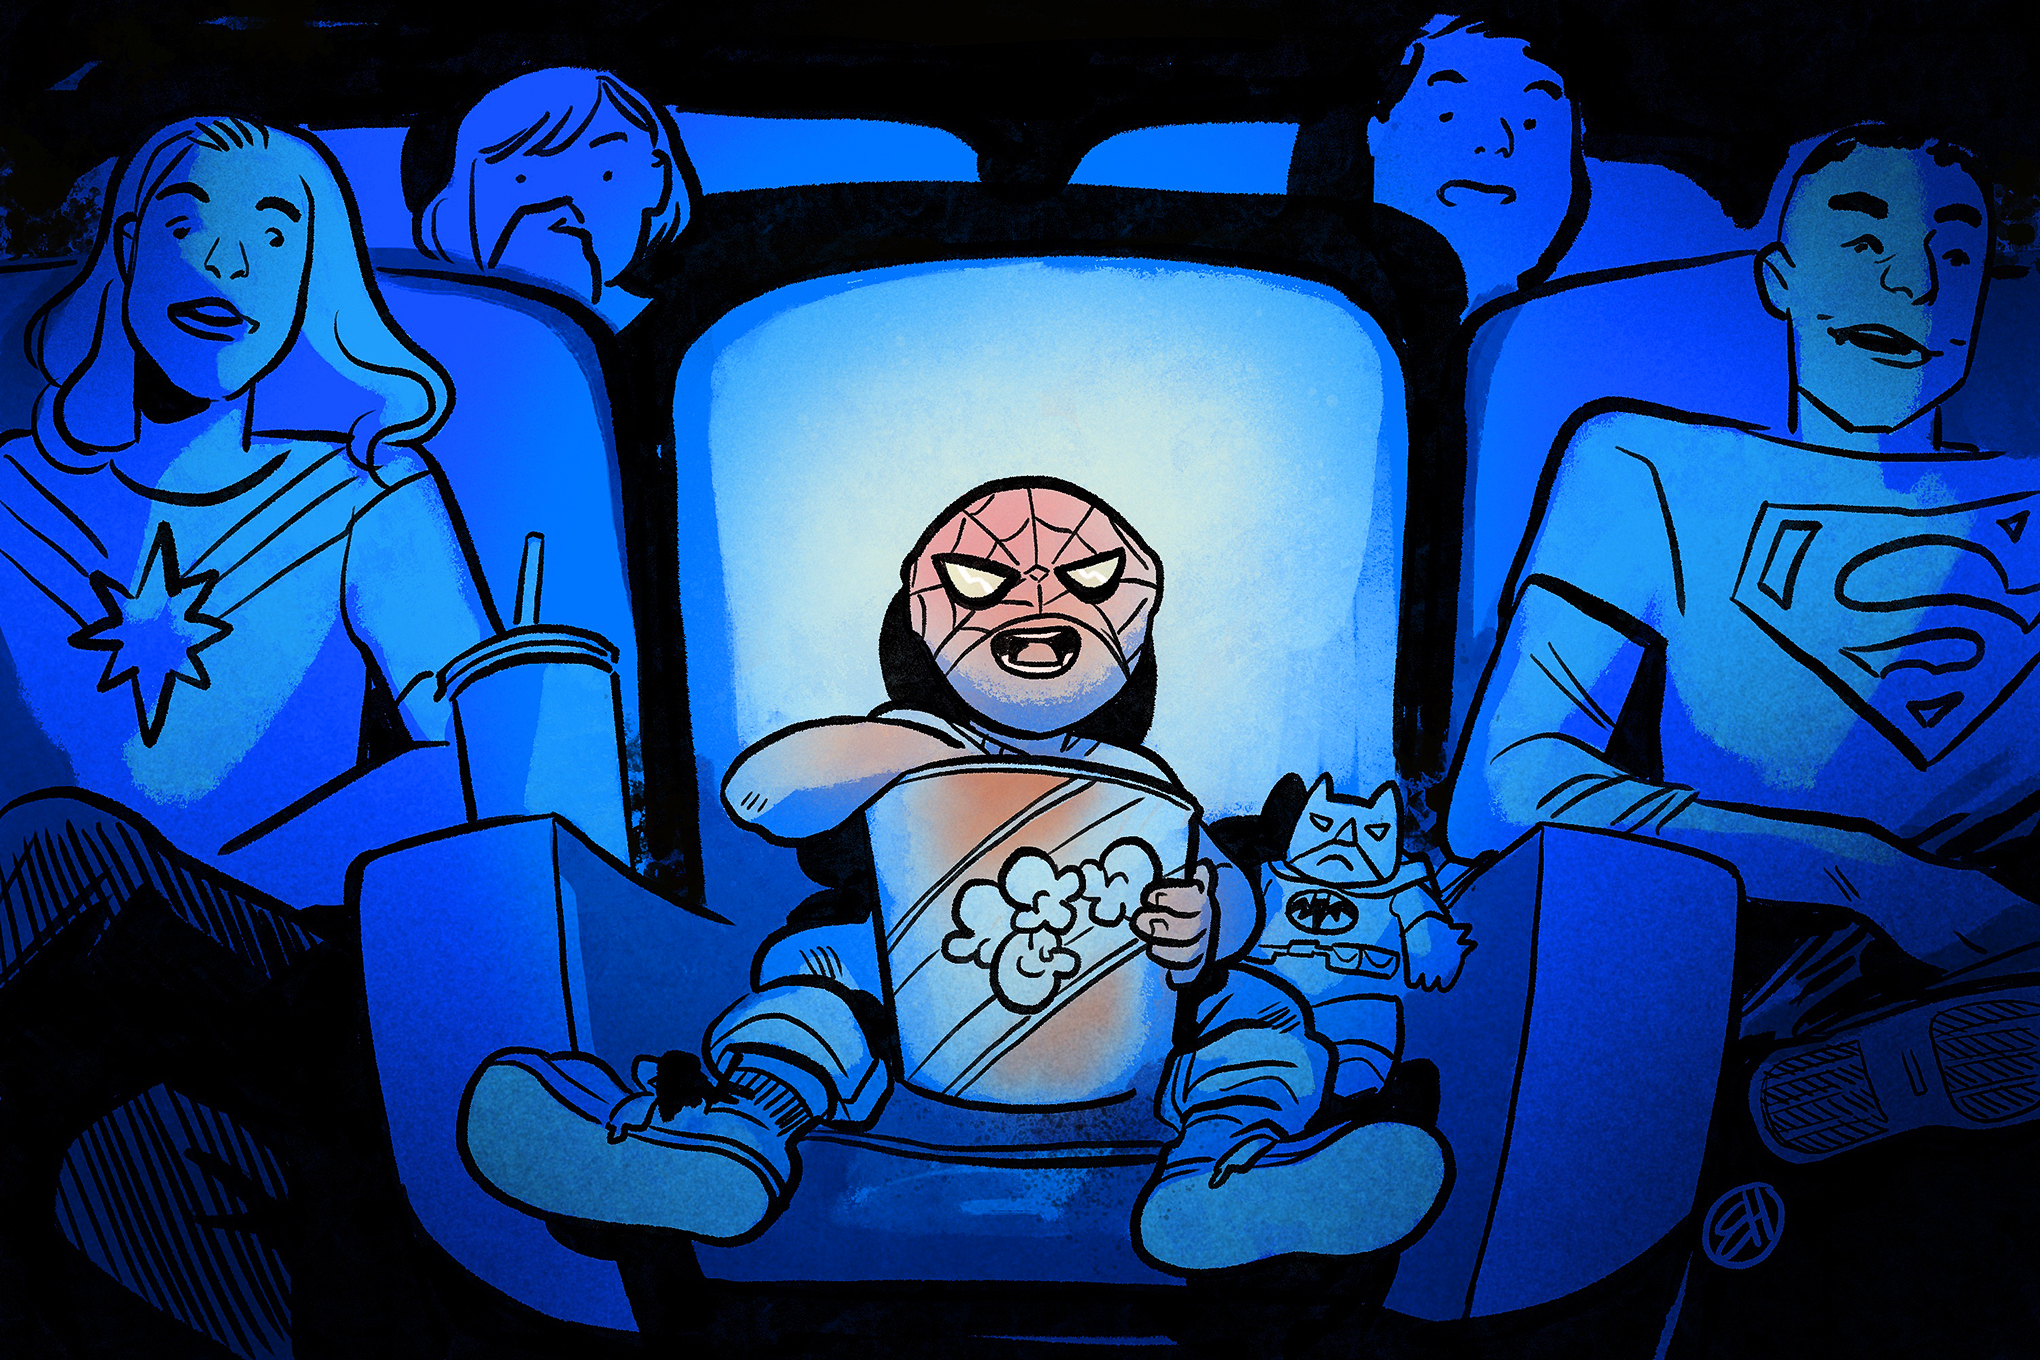 Illustration of a young spider man fan in the cinema eating popcorn and watching a movie surrounded by other superhero fans